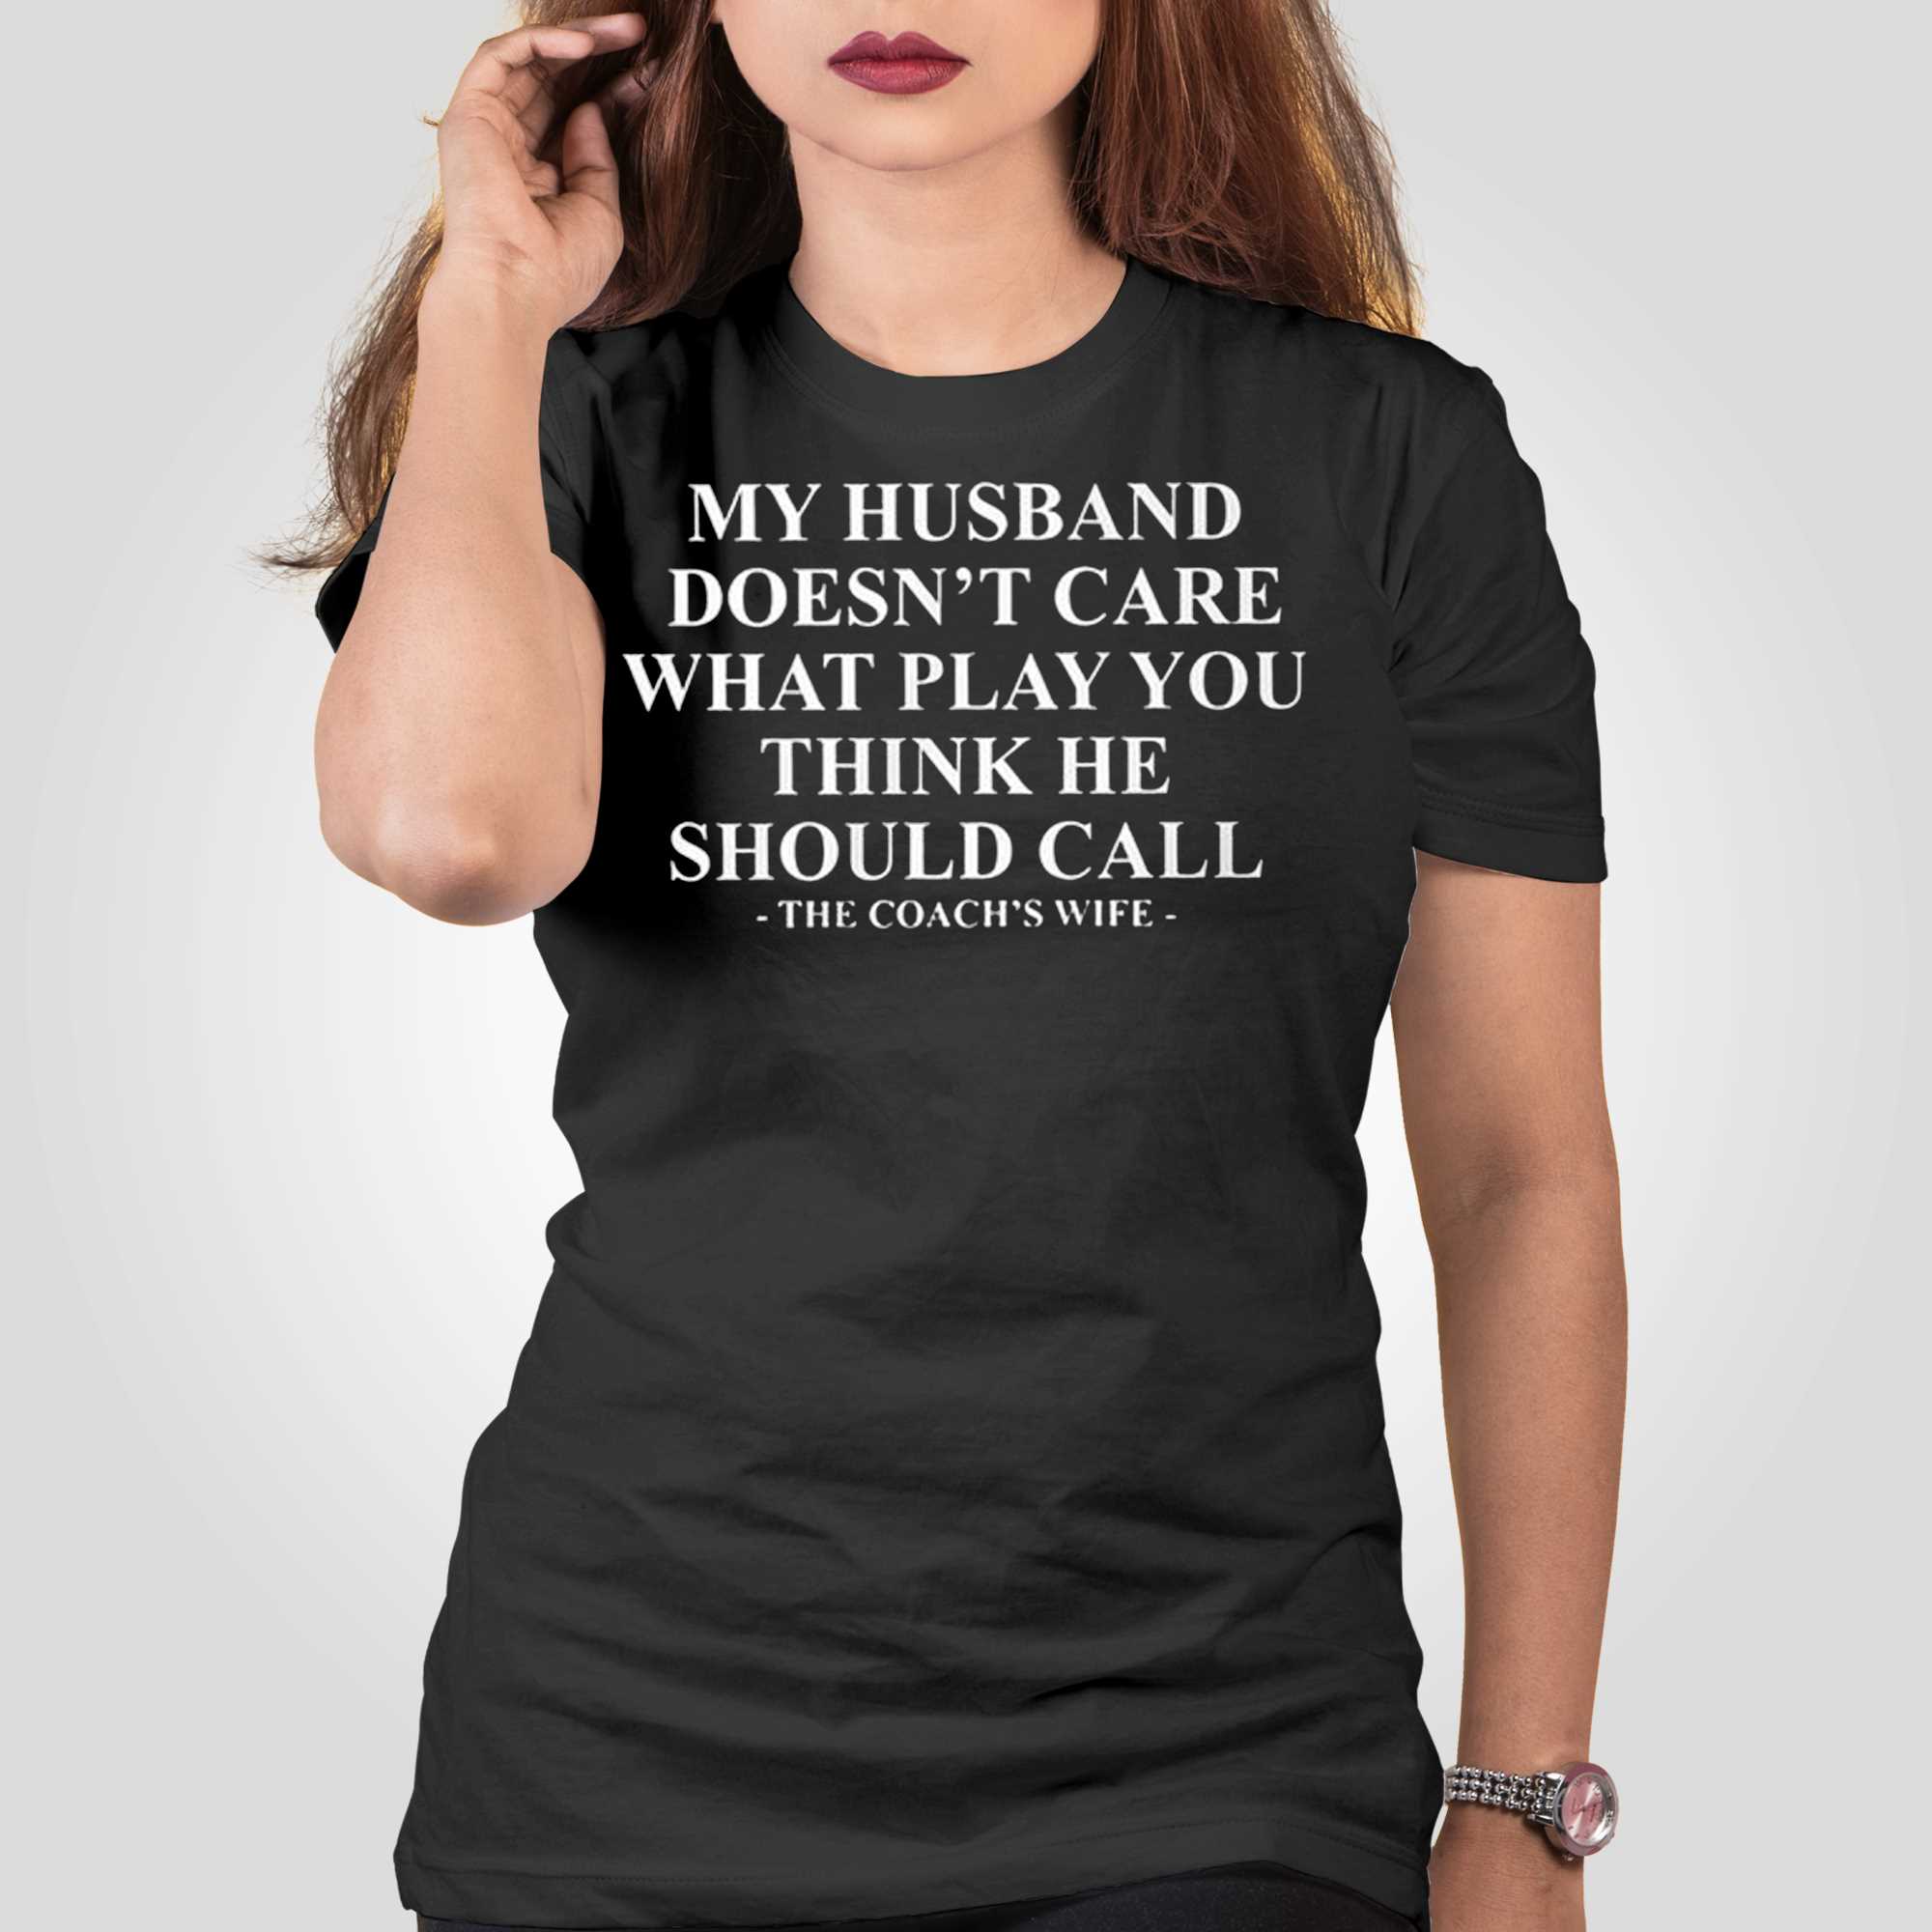 My Husband Doesn't Care What Play You Think He Should Call -the Coach's Wife Shirt - Shibtee